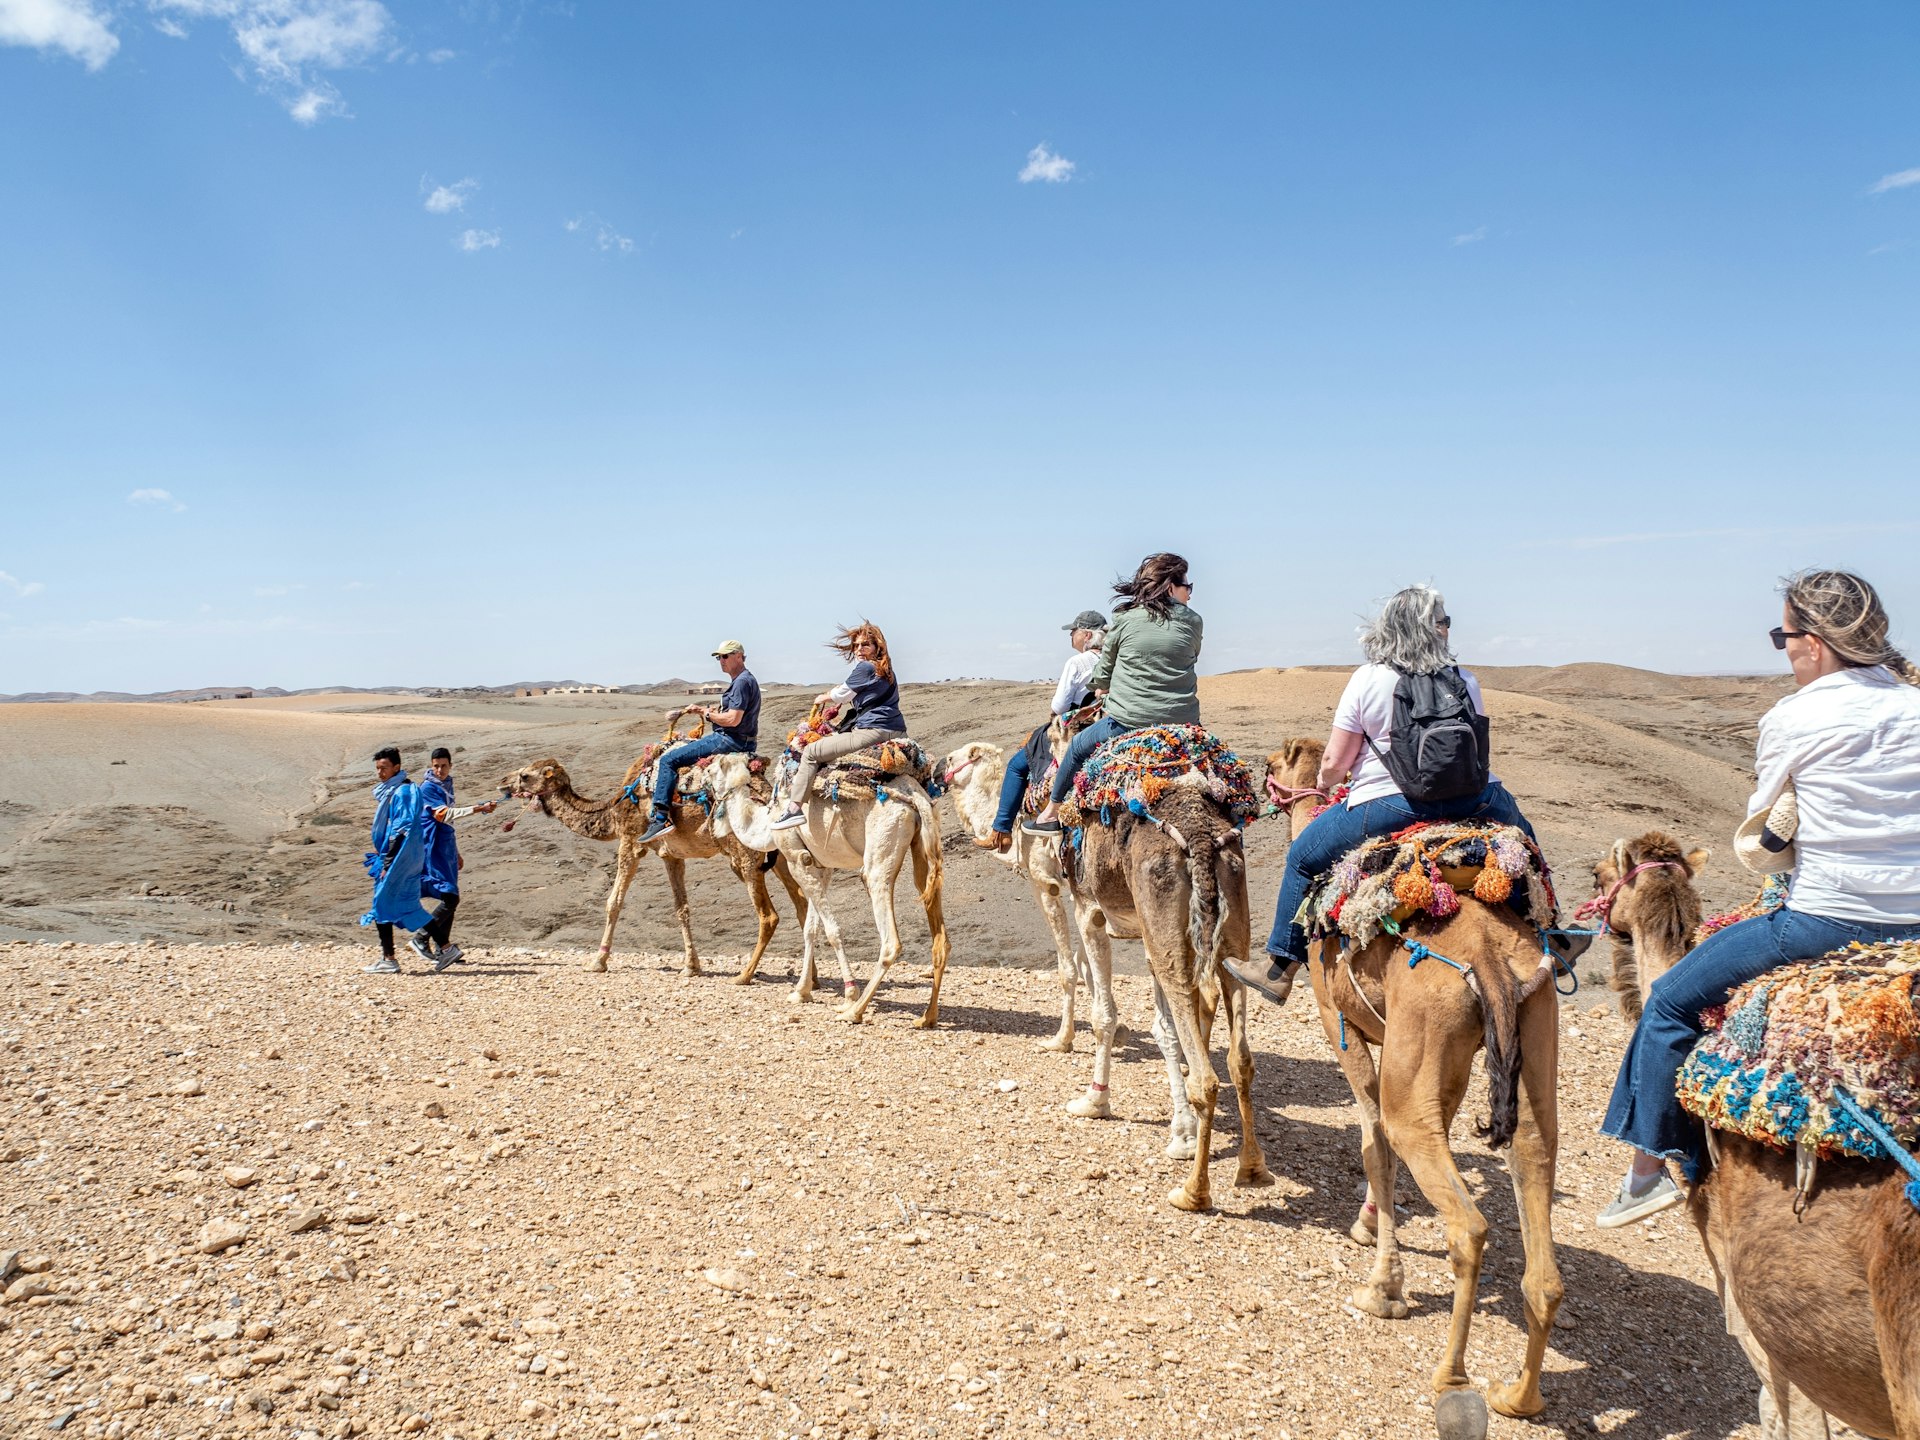 A family on a camel tour of the desert